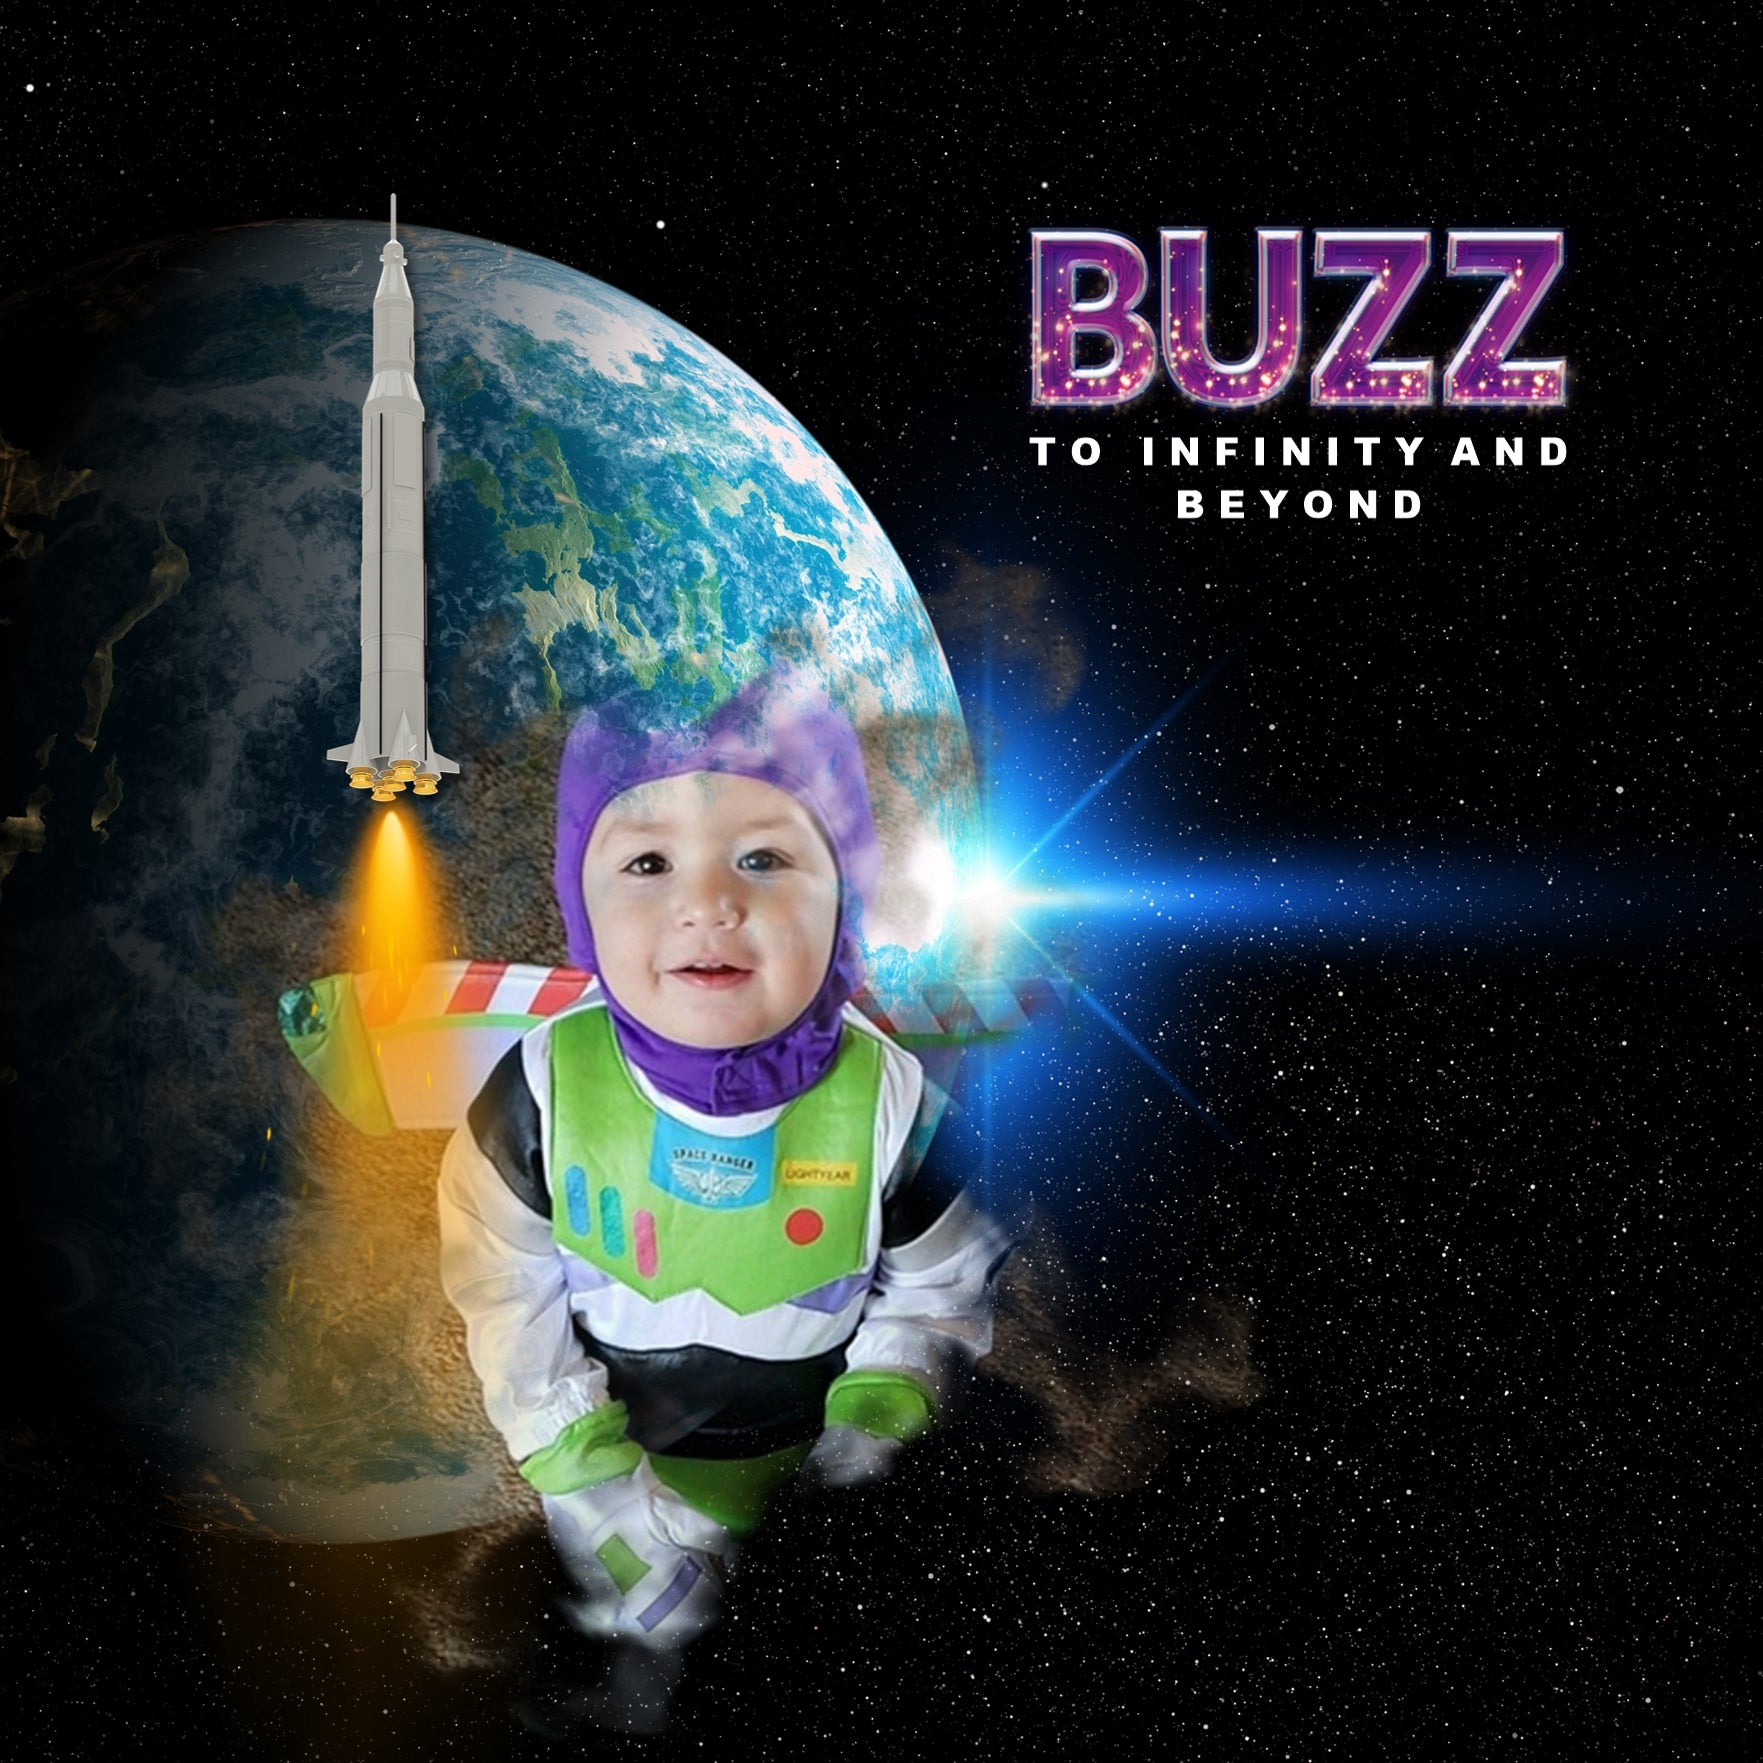 These smoke-filled photo masks by Lucky Girl Creative are great for creating digital pages including Toy Story, Star Wars, Star Trek, Guardians of the Galaxy, Lightyear, NASA, SpaceX, space exploration, space launches, or space observatory trips. Fill with your favorite photo or paper or layer the filled photo masks to create an out-of-this-world look.